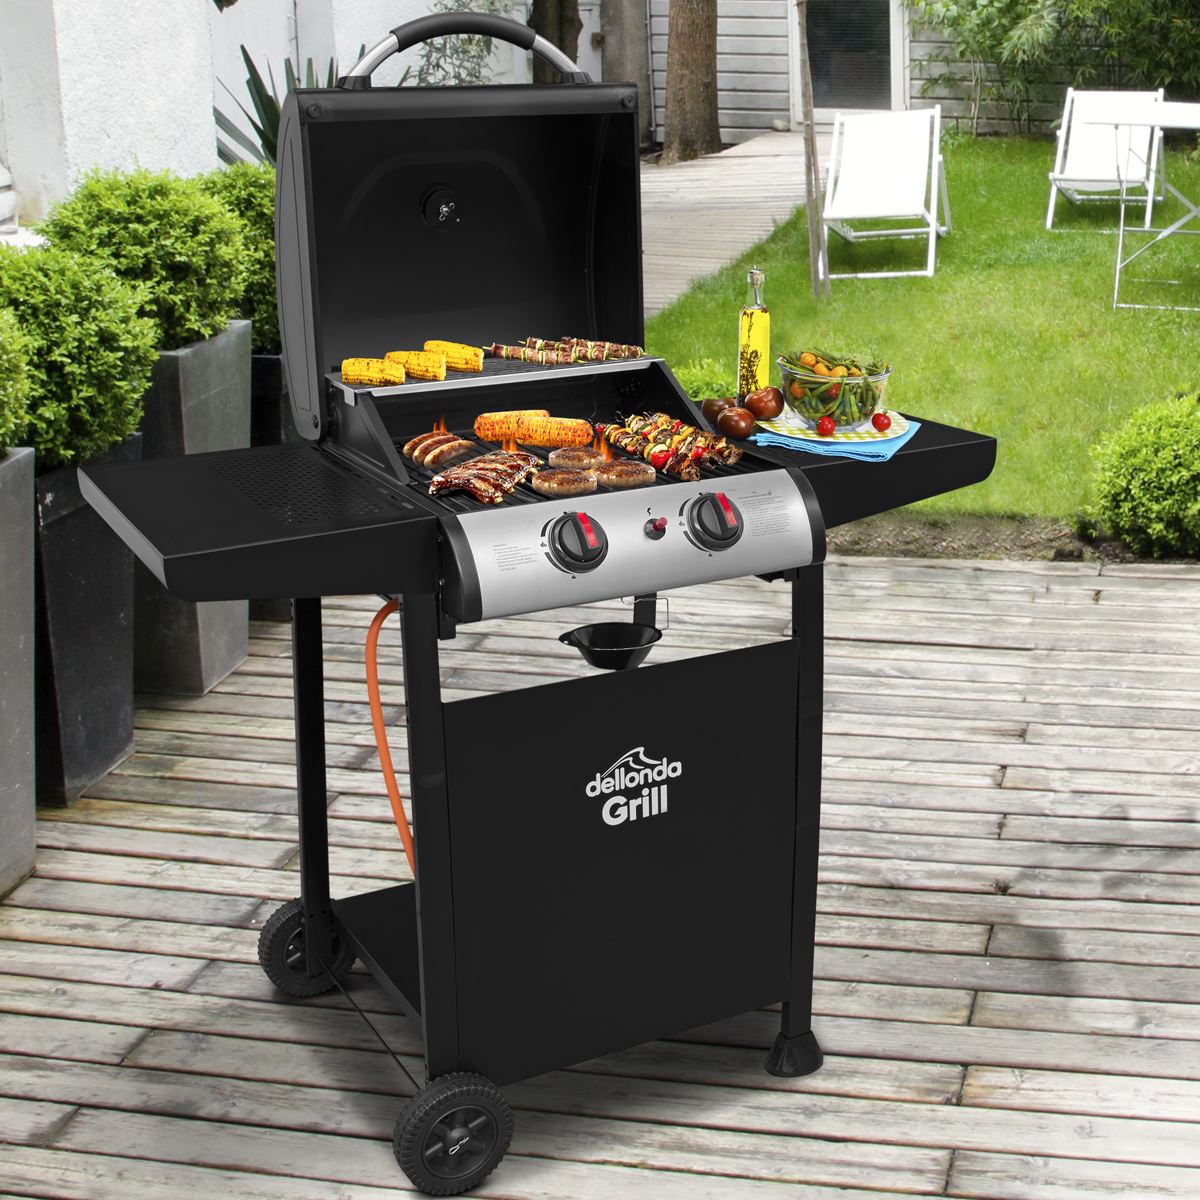 Dellonda 2 Burner Gas BBQ Grill with Ignition & Thermometer - Black/Stainless Steel